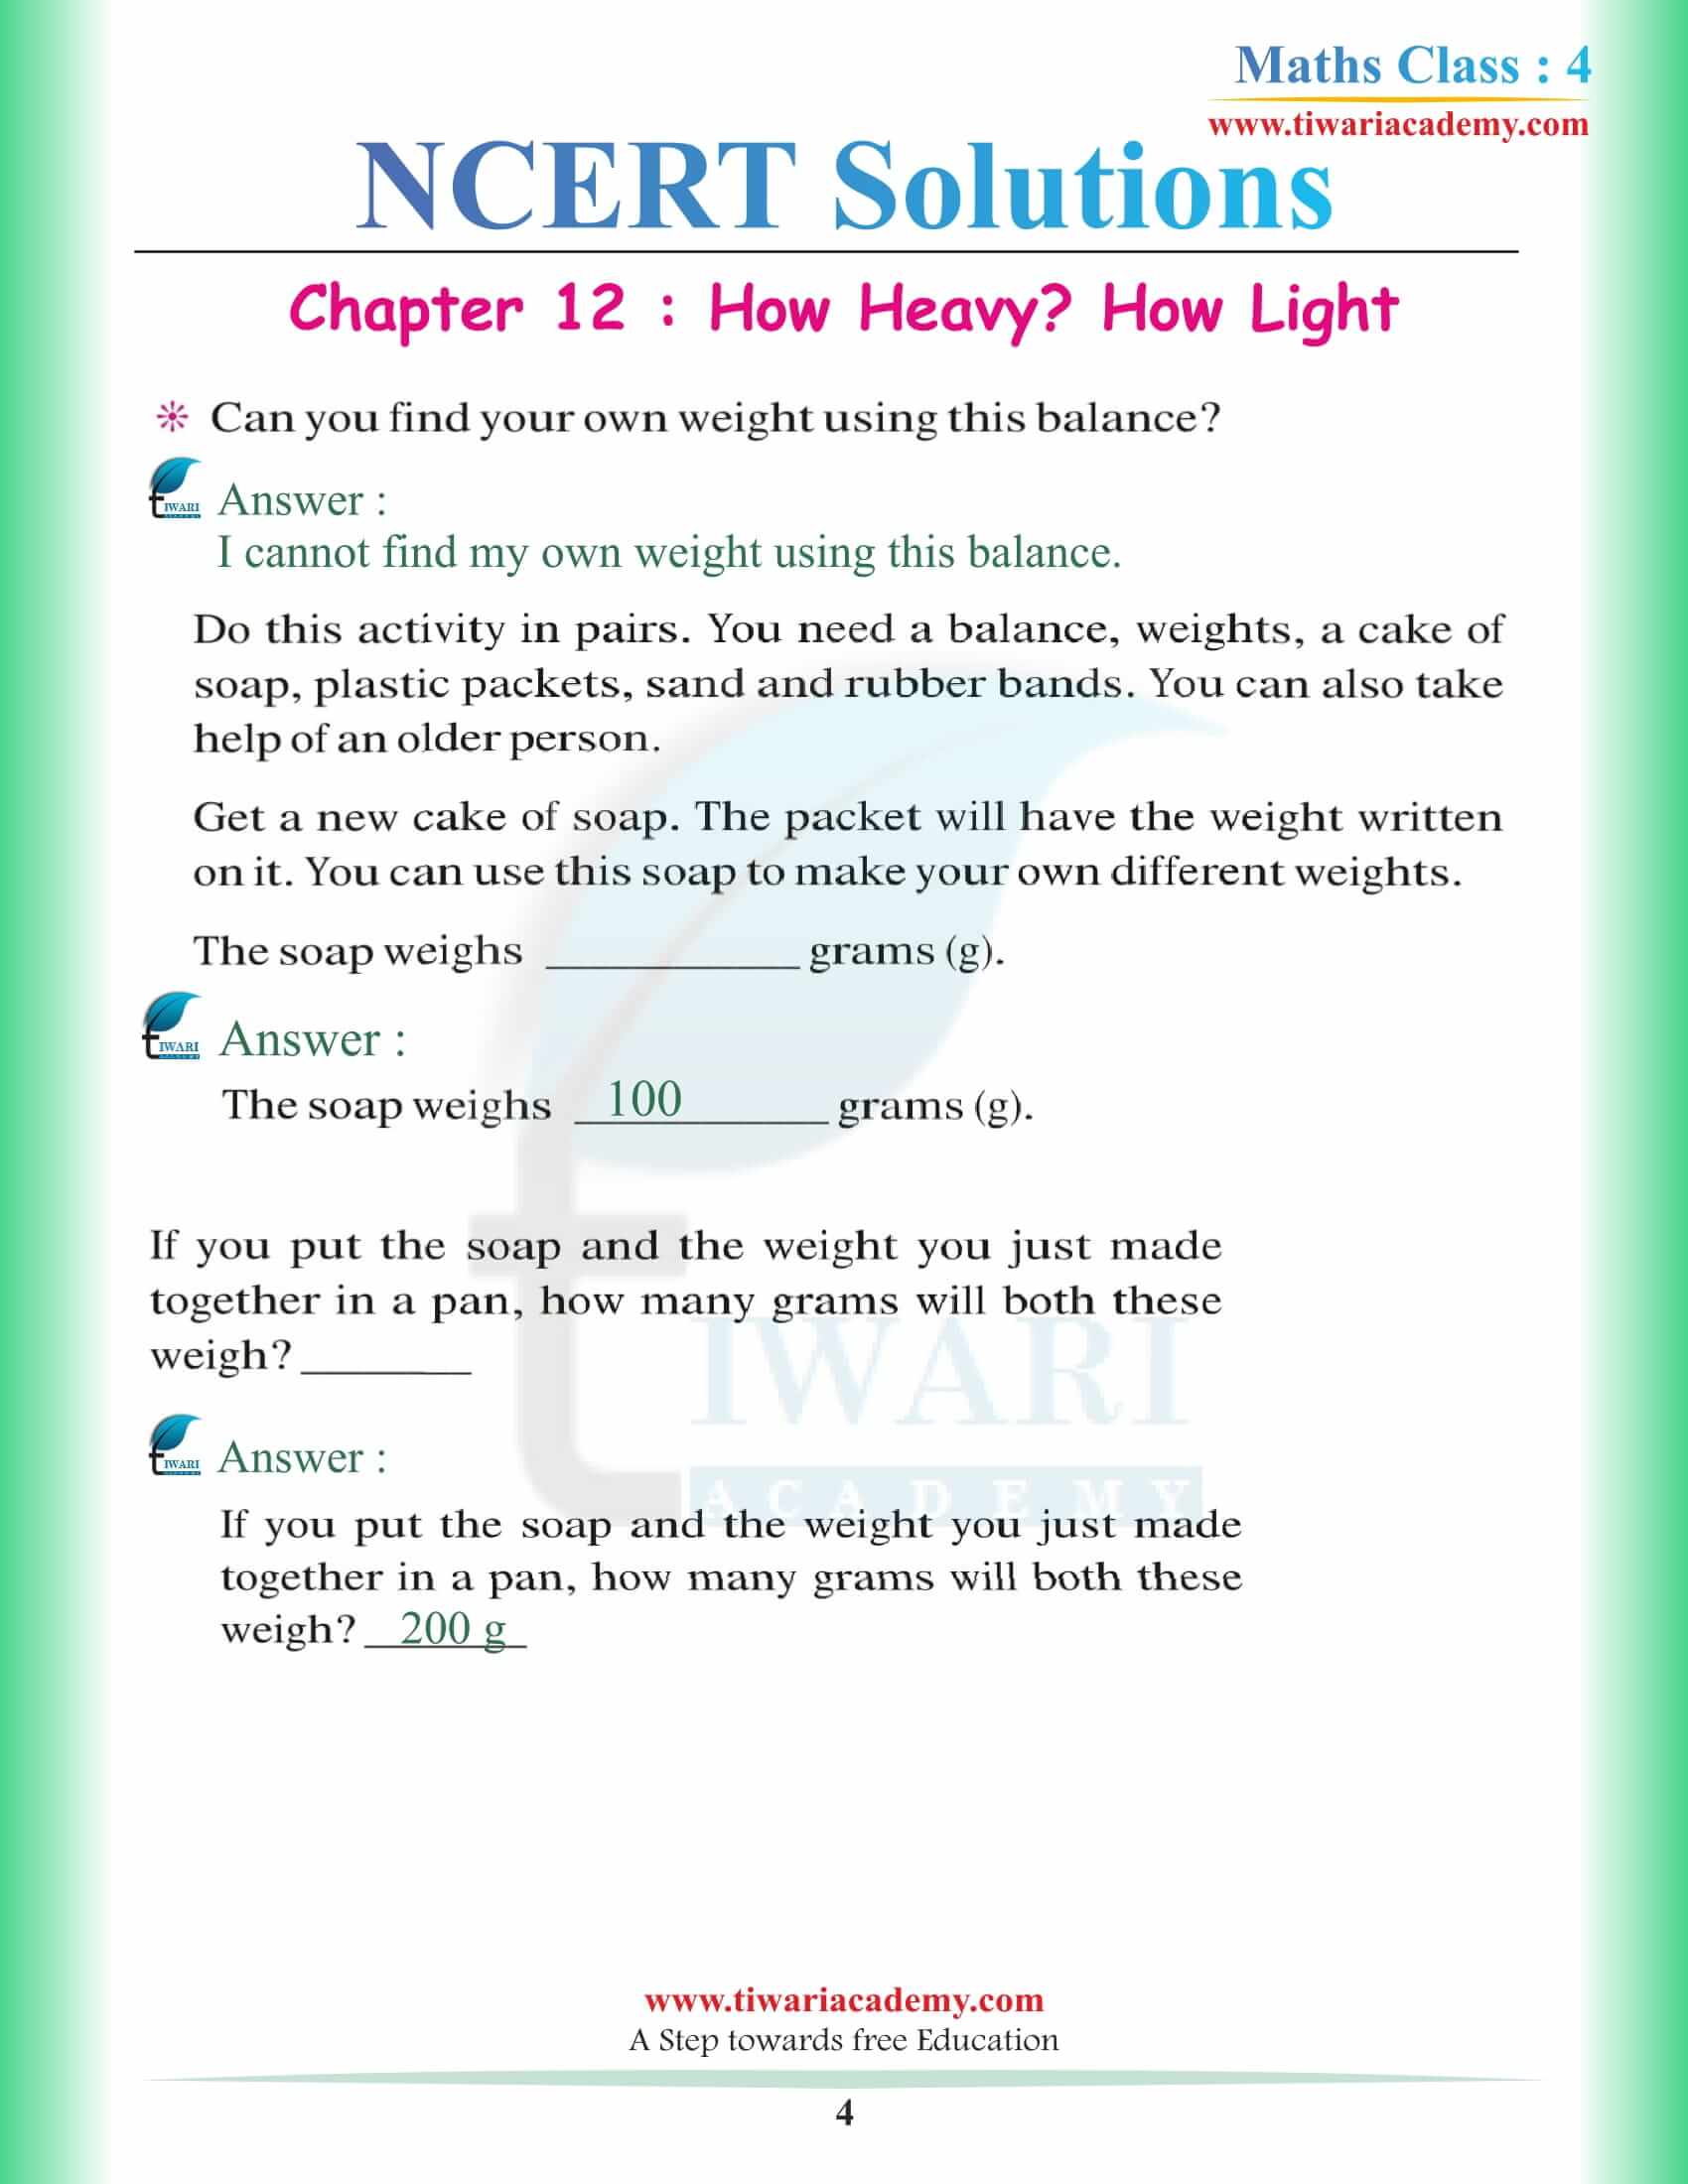 NCERT Solutions for Class 4 Maths Chapter 12 in English Medium